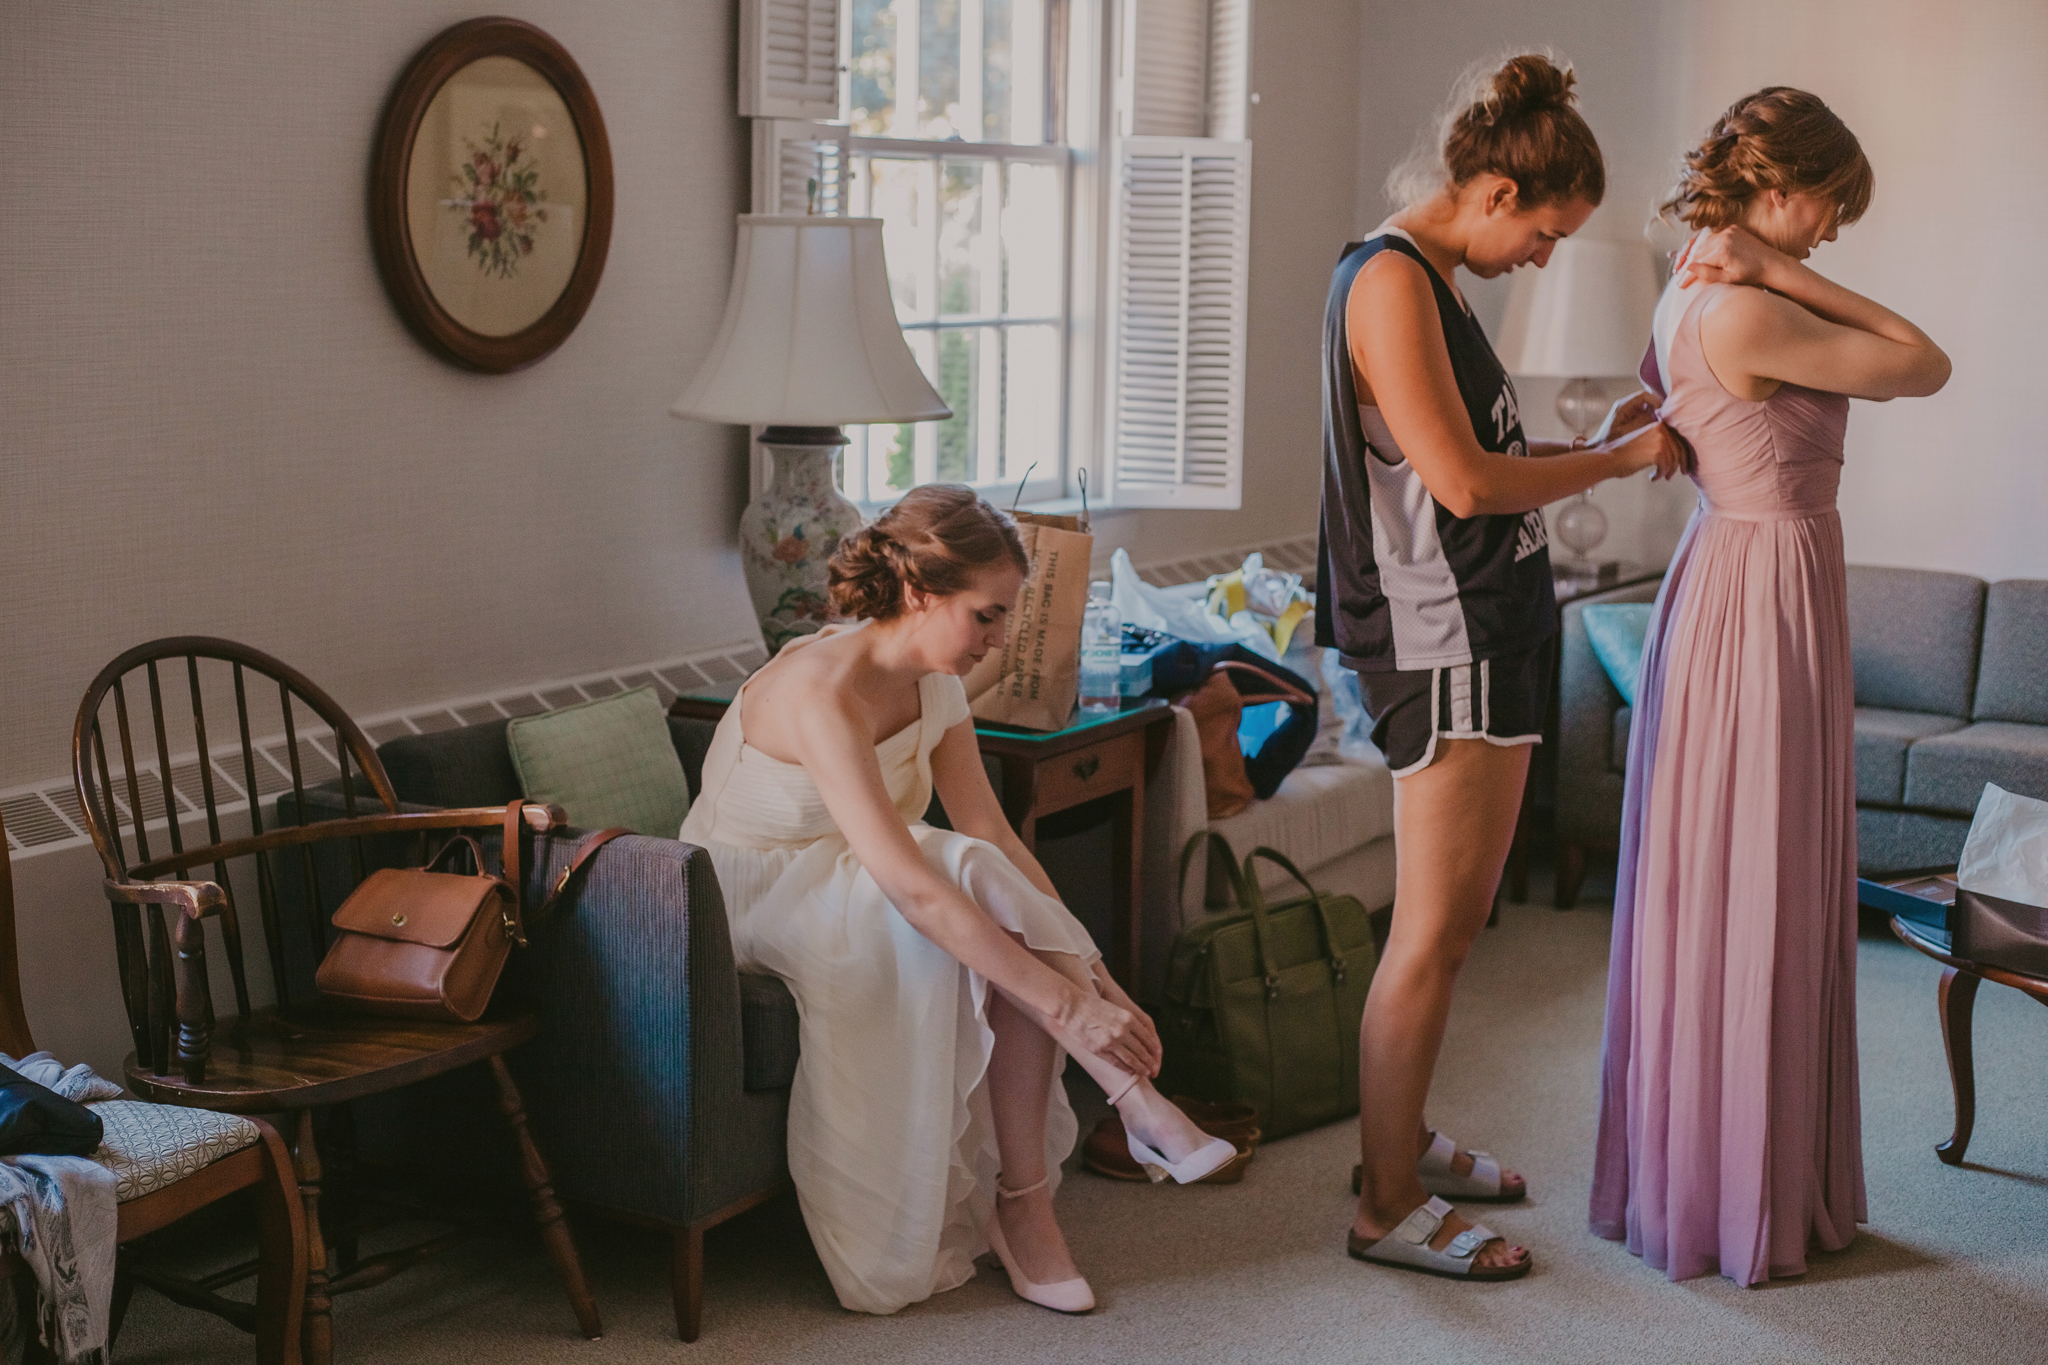 First Friends Meeting Greensboro, NC Wedding Photographer Mabyn Ludke Potography